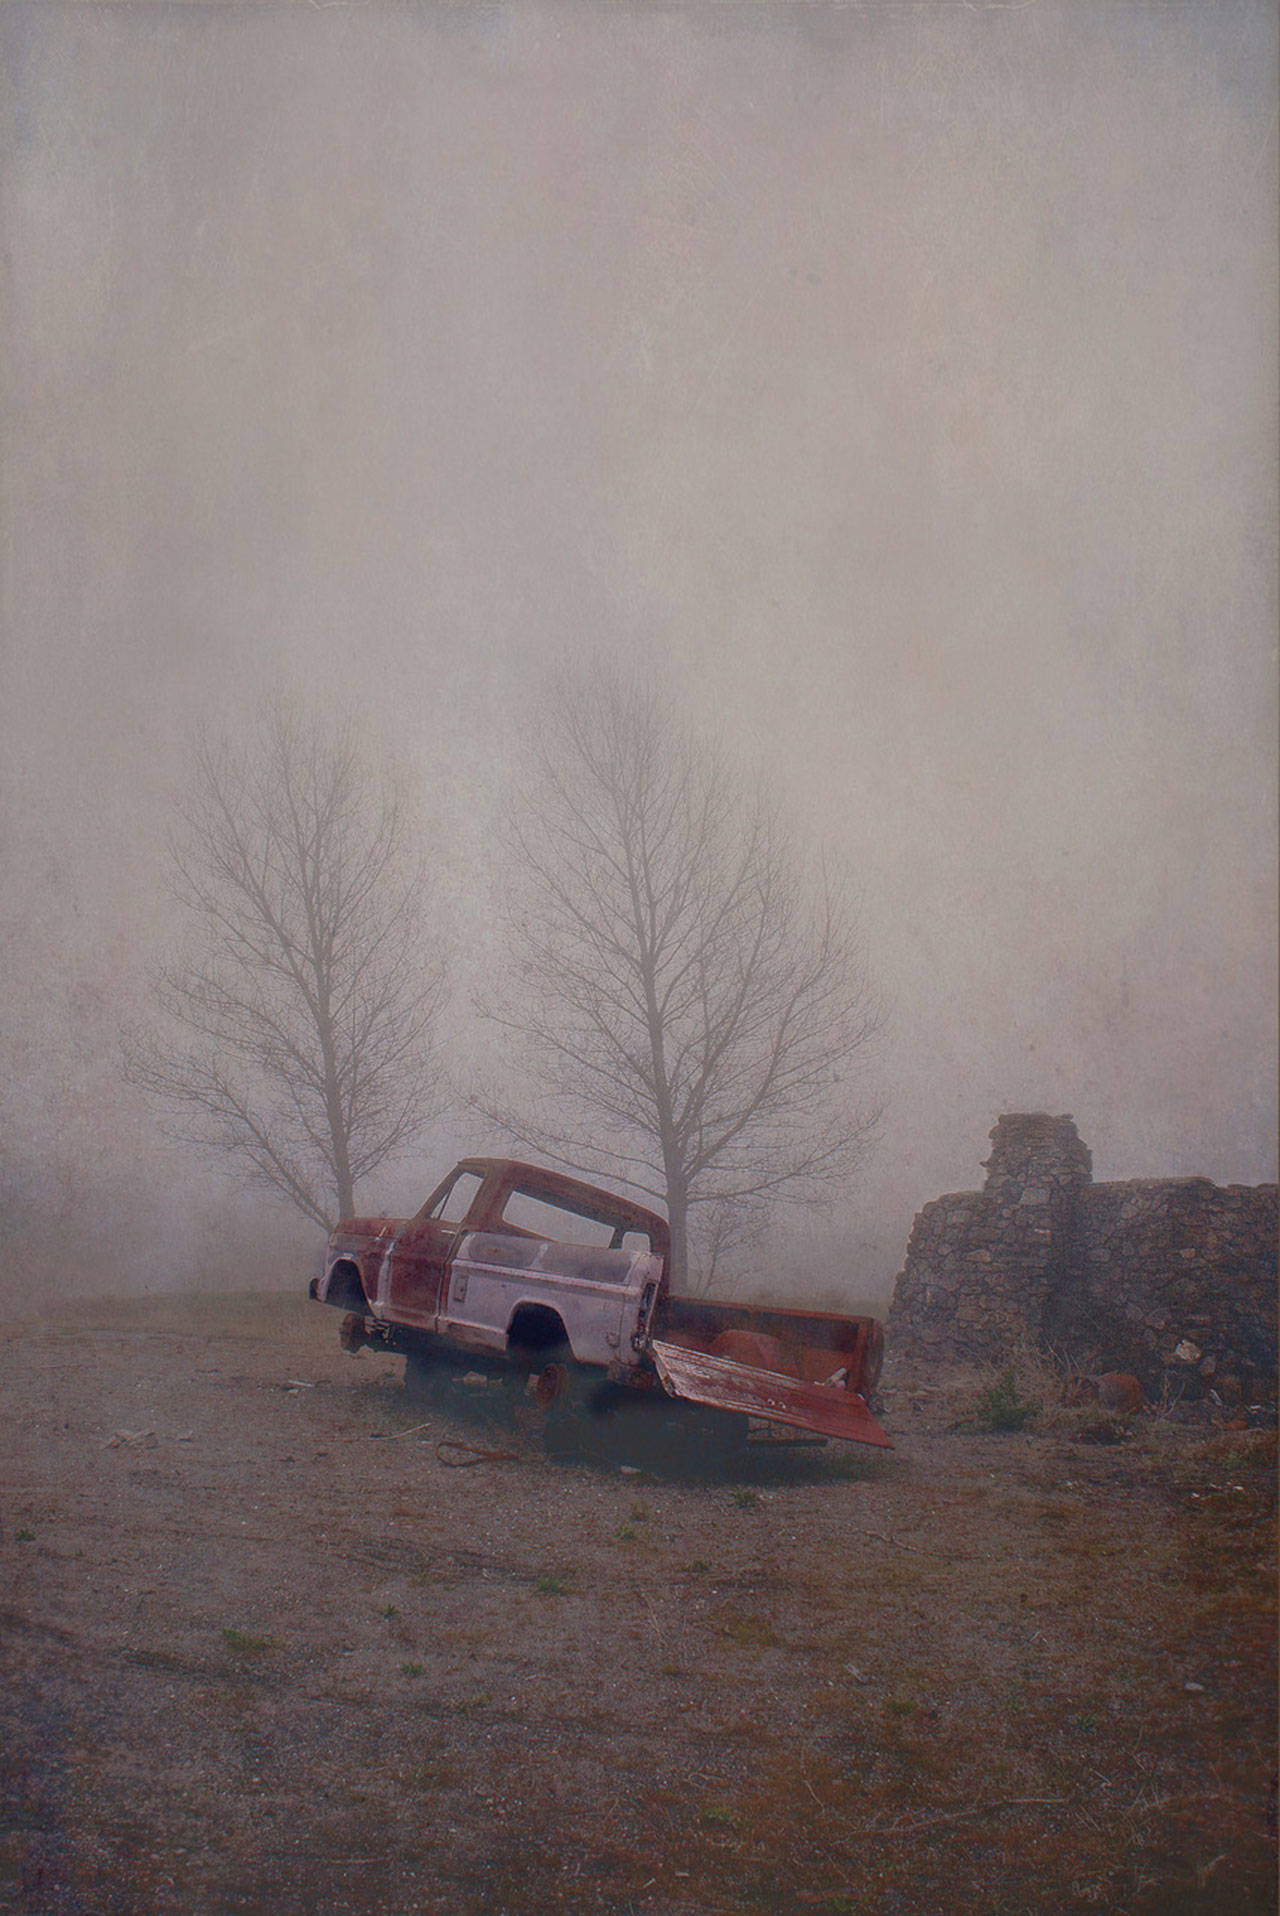 Marguerite Garth’s photograph, “the forsaken 1” is part of an exhibition at Vashon Center for the Arts (Courtesy Photo).